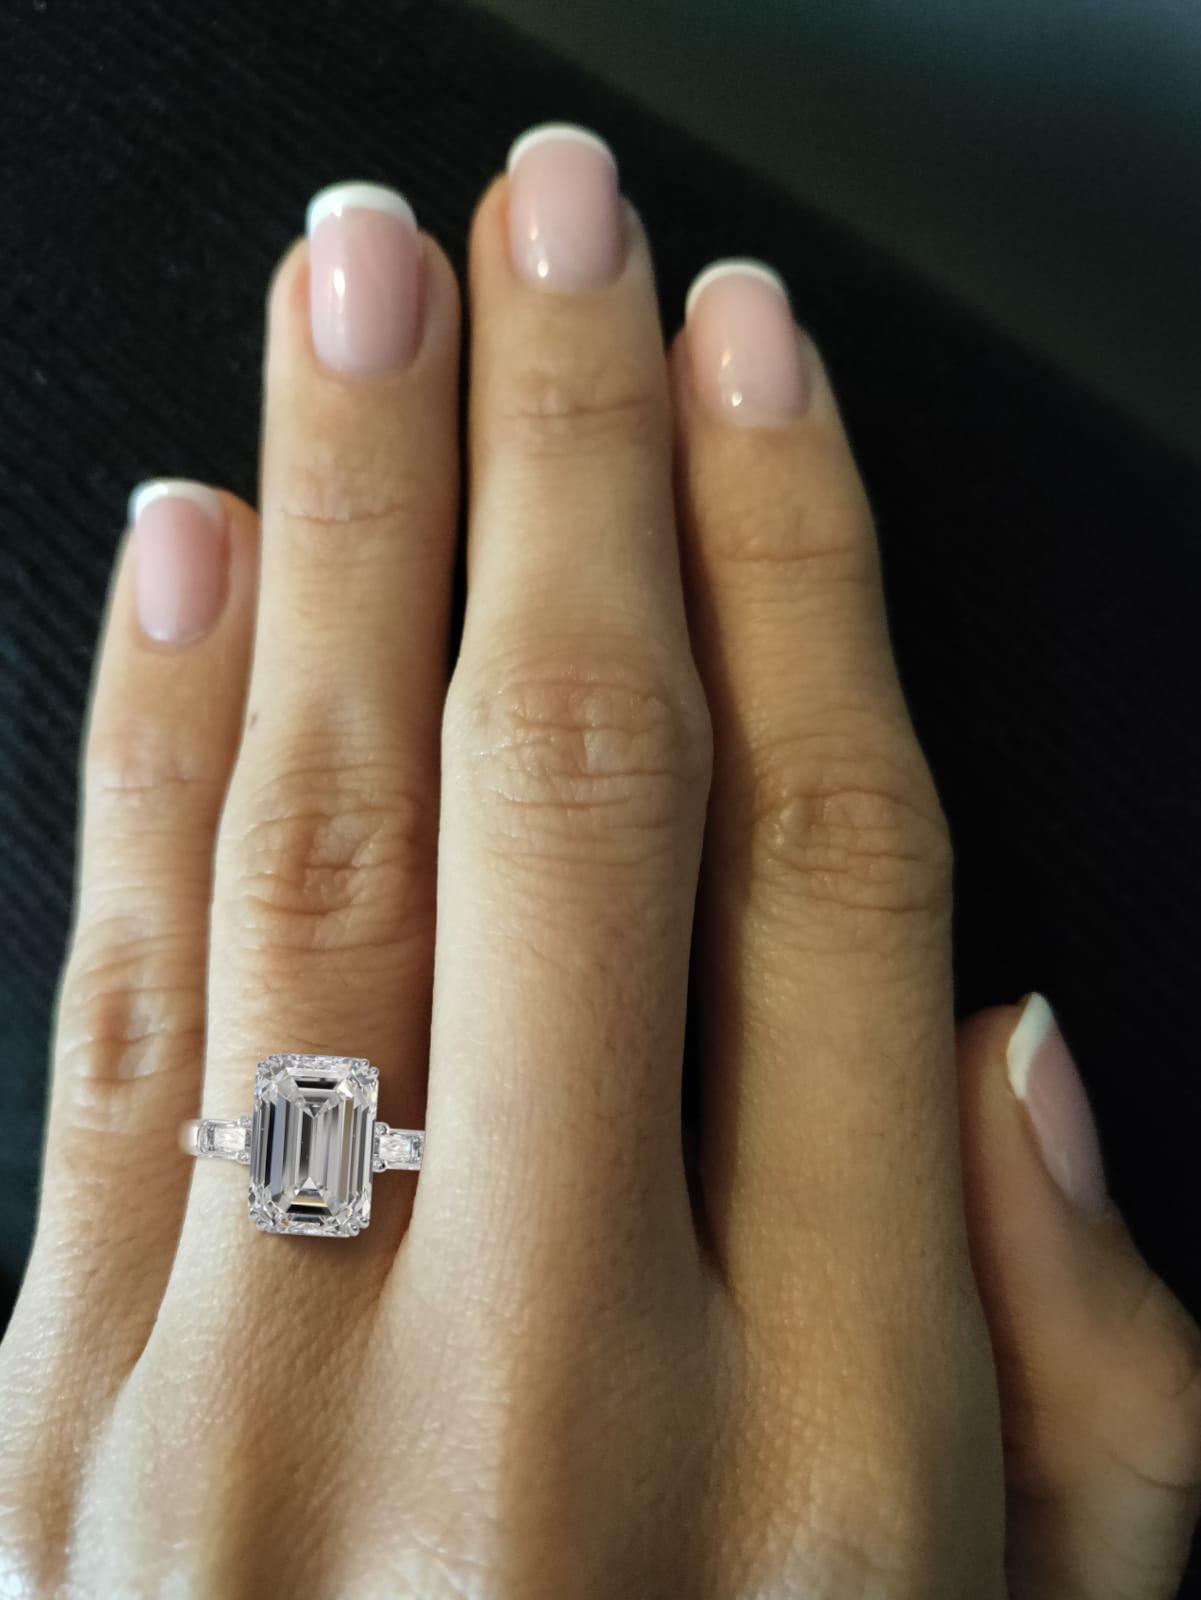 An exquisite GIA Certified 4 Carat Emerald Cut Diamond Ring VVS1 Clarity G Color mounted in solid 950 platinum.